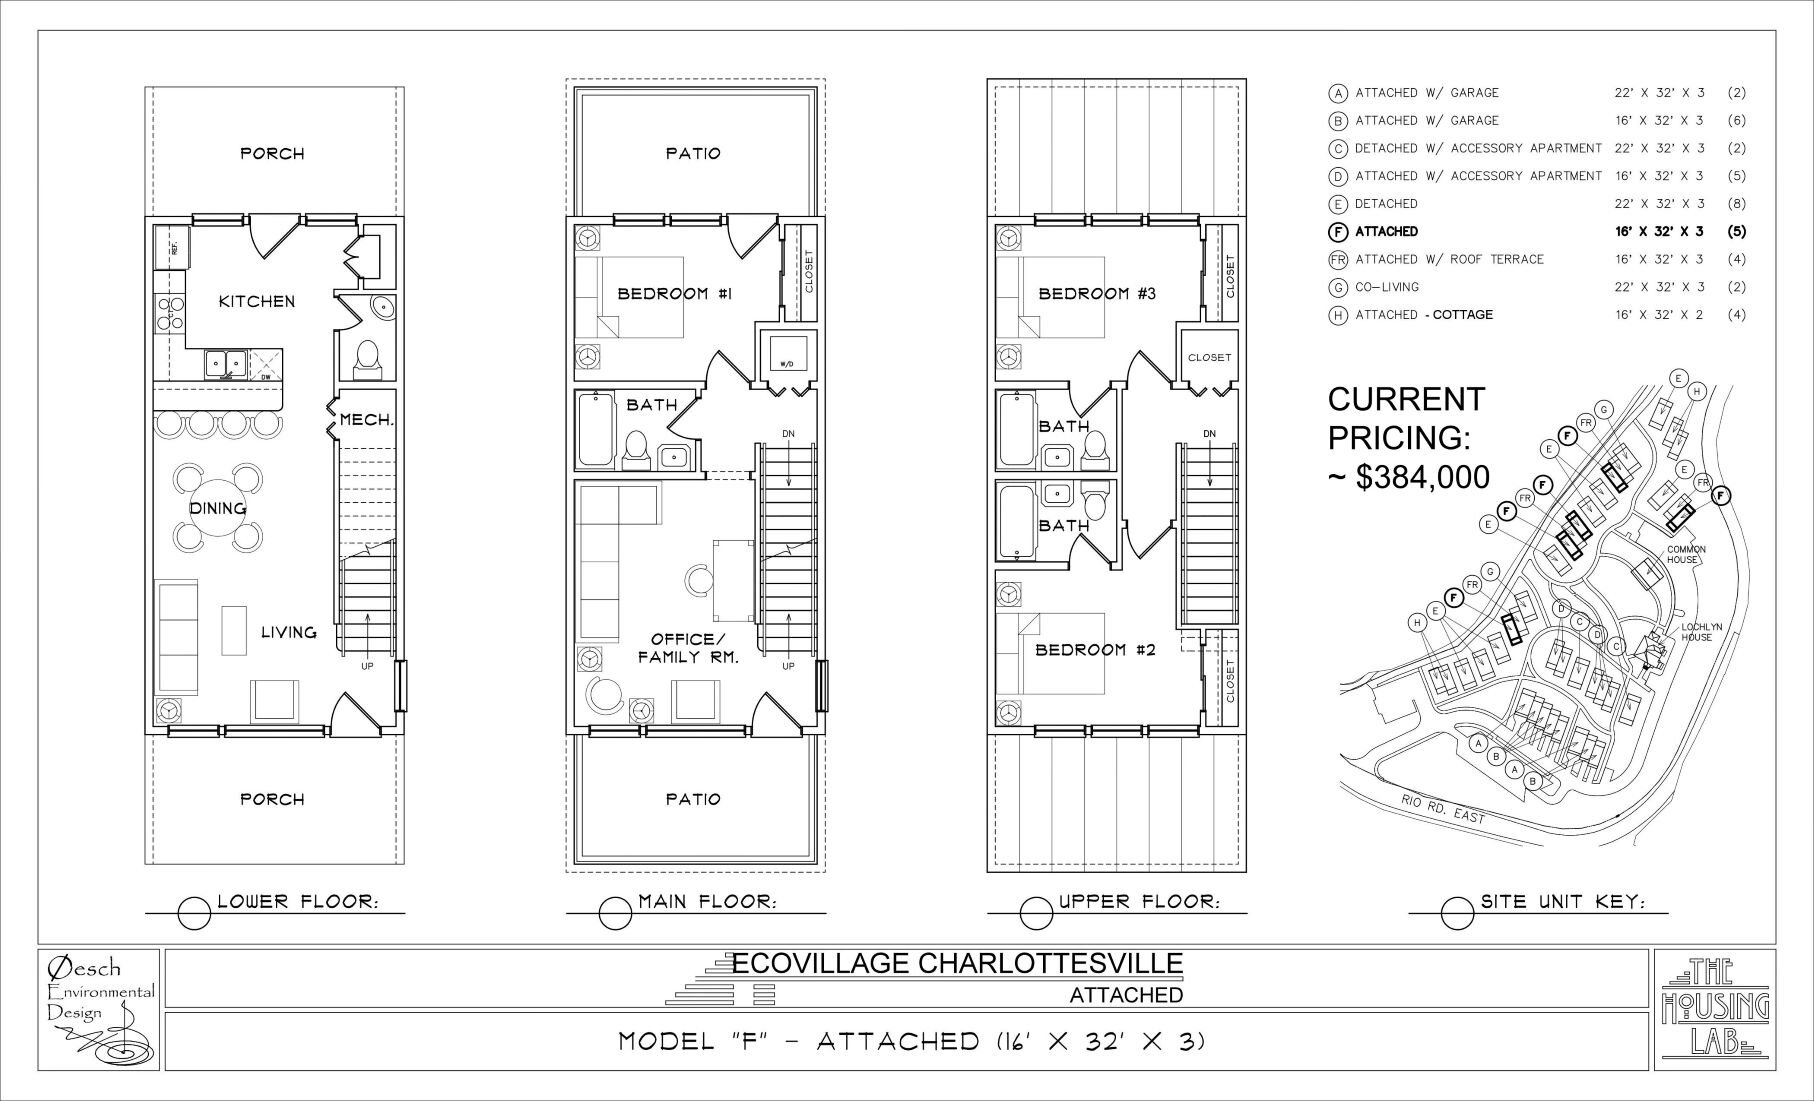   Model F  3 or 4 Bed Attached  (16' X 32' X 3) $384,000 